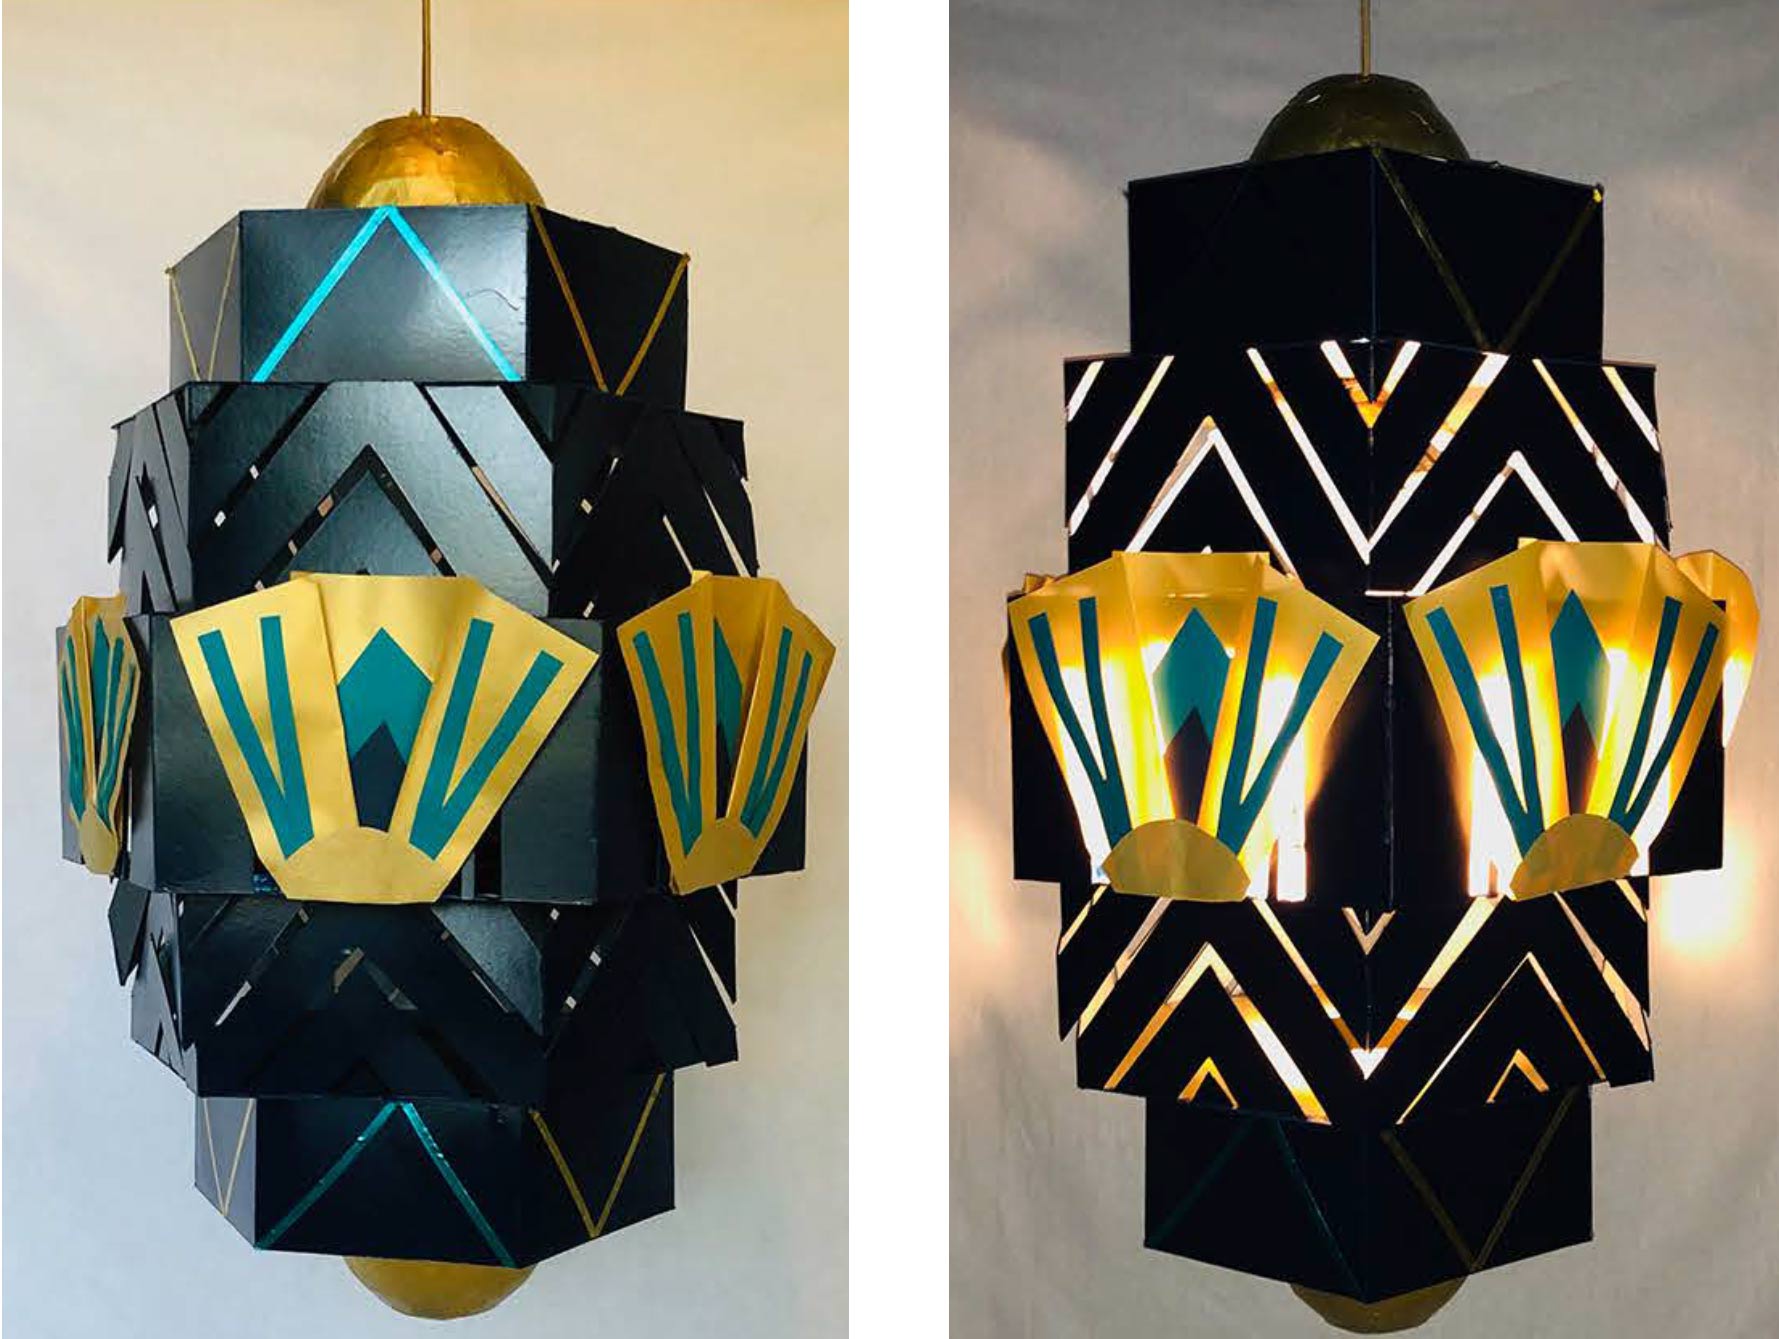 photos of a lamp designed from substainable materials..